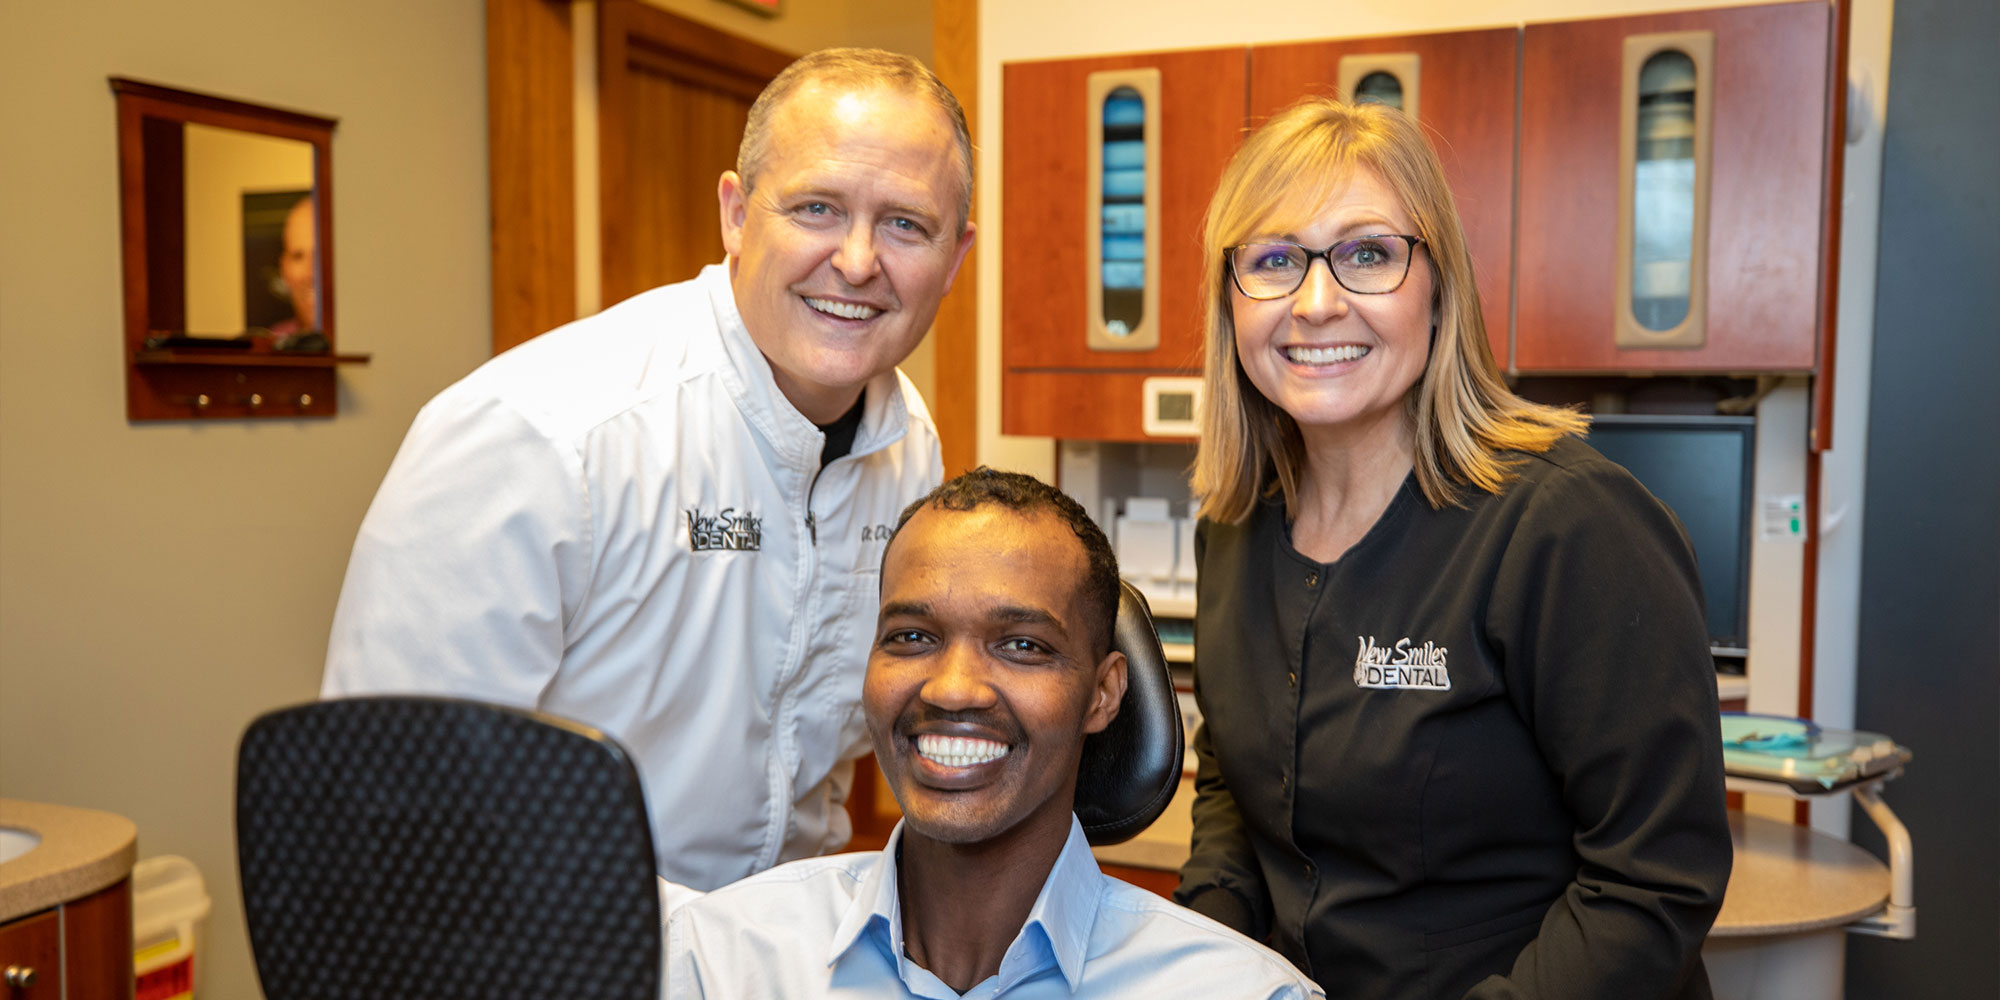 Patient and staff member and doctor smiling after dental procedure